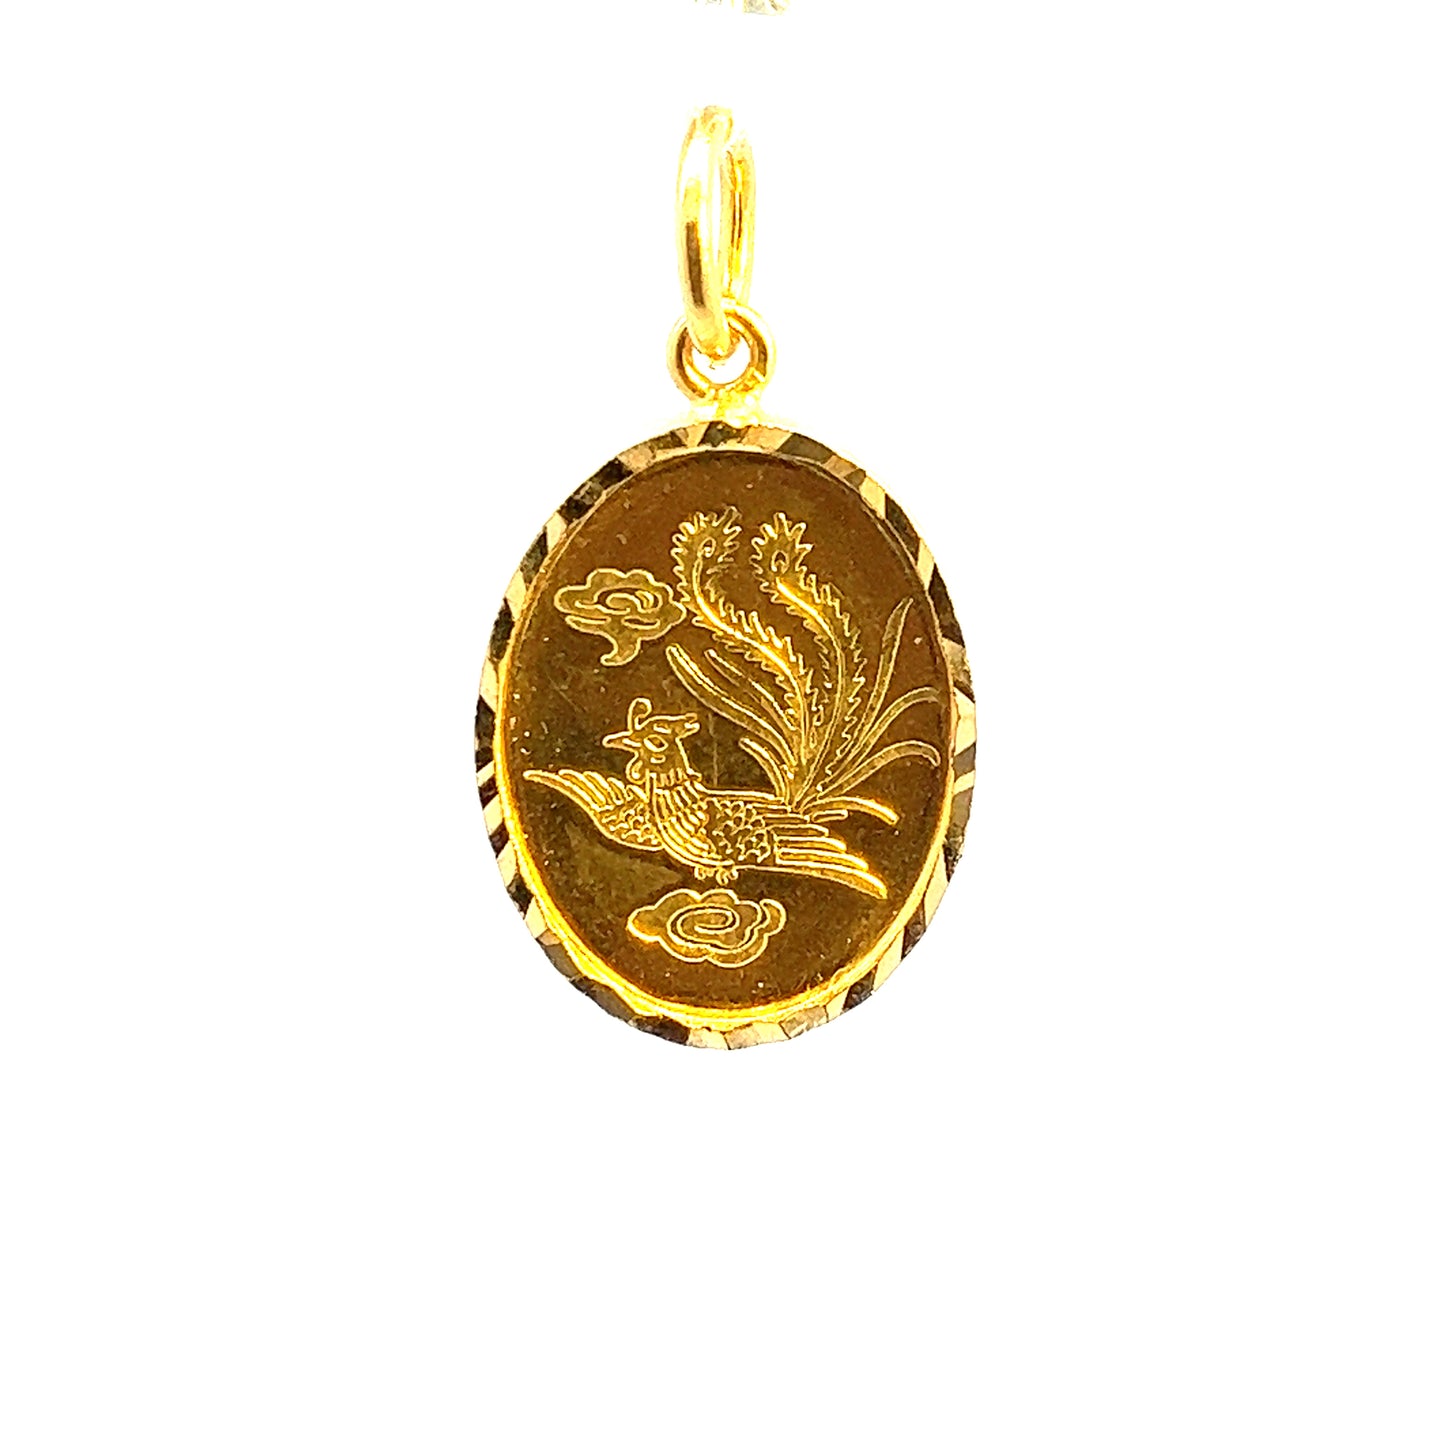 GOLD PENDANT ( 22K ) ( 2.54g ) - 0003153 Chain sold separately